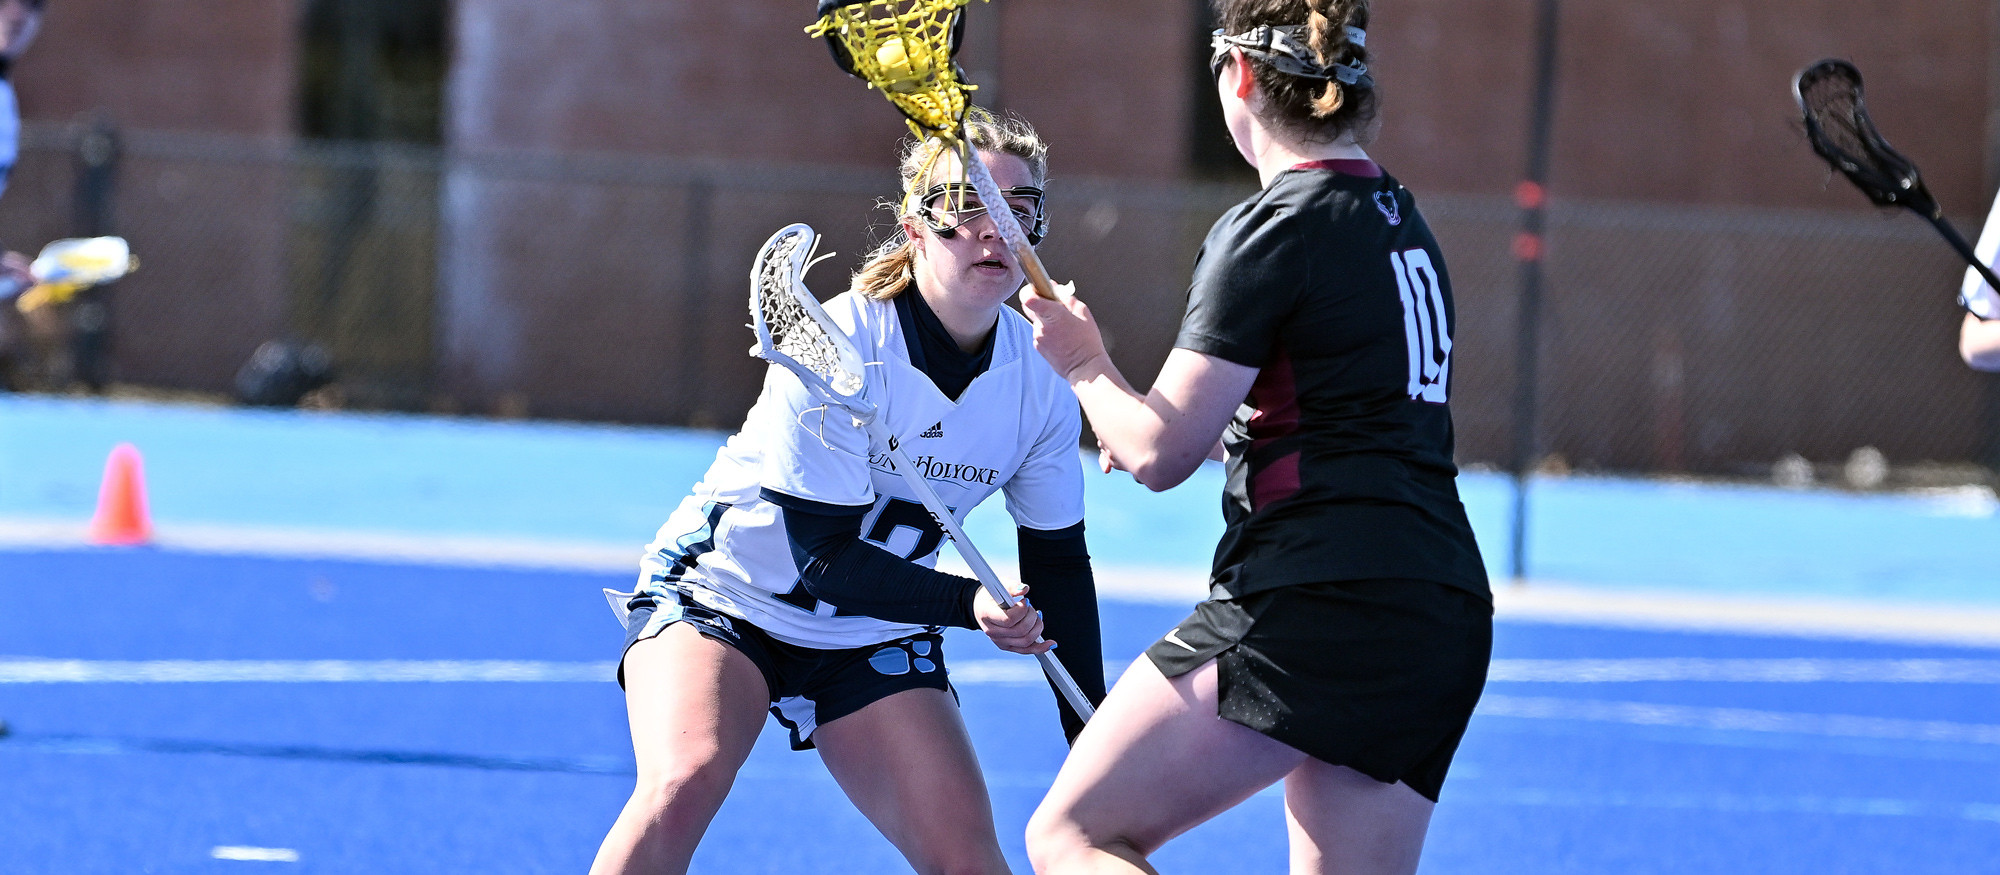 Taylor Dunn had five ground balls and two caused turnovers in Mount Holyoke's 15-4 loss at Emerson on March 25, 2023. (RJB Sports file photo)